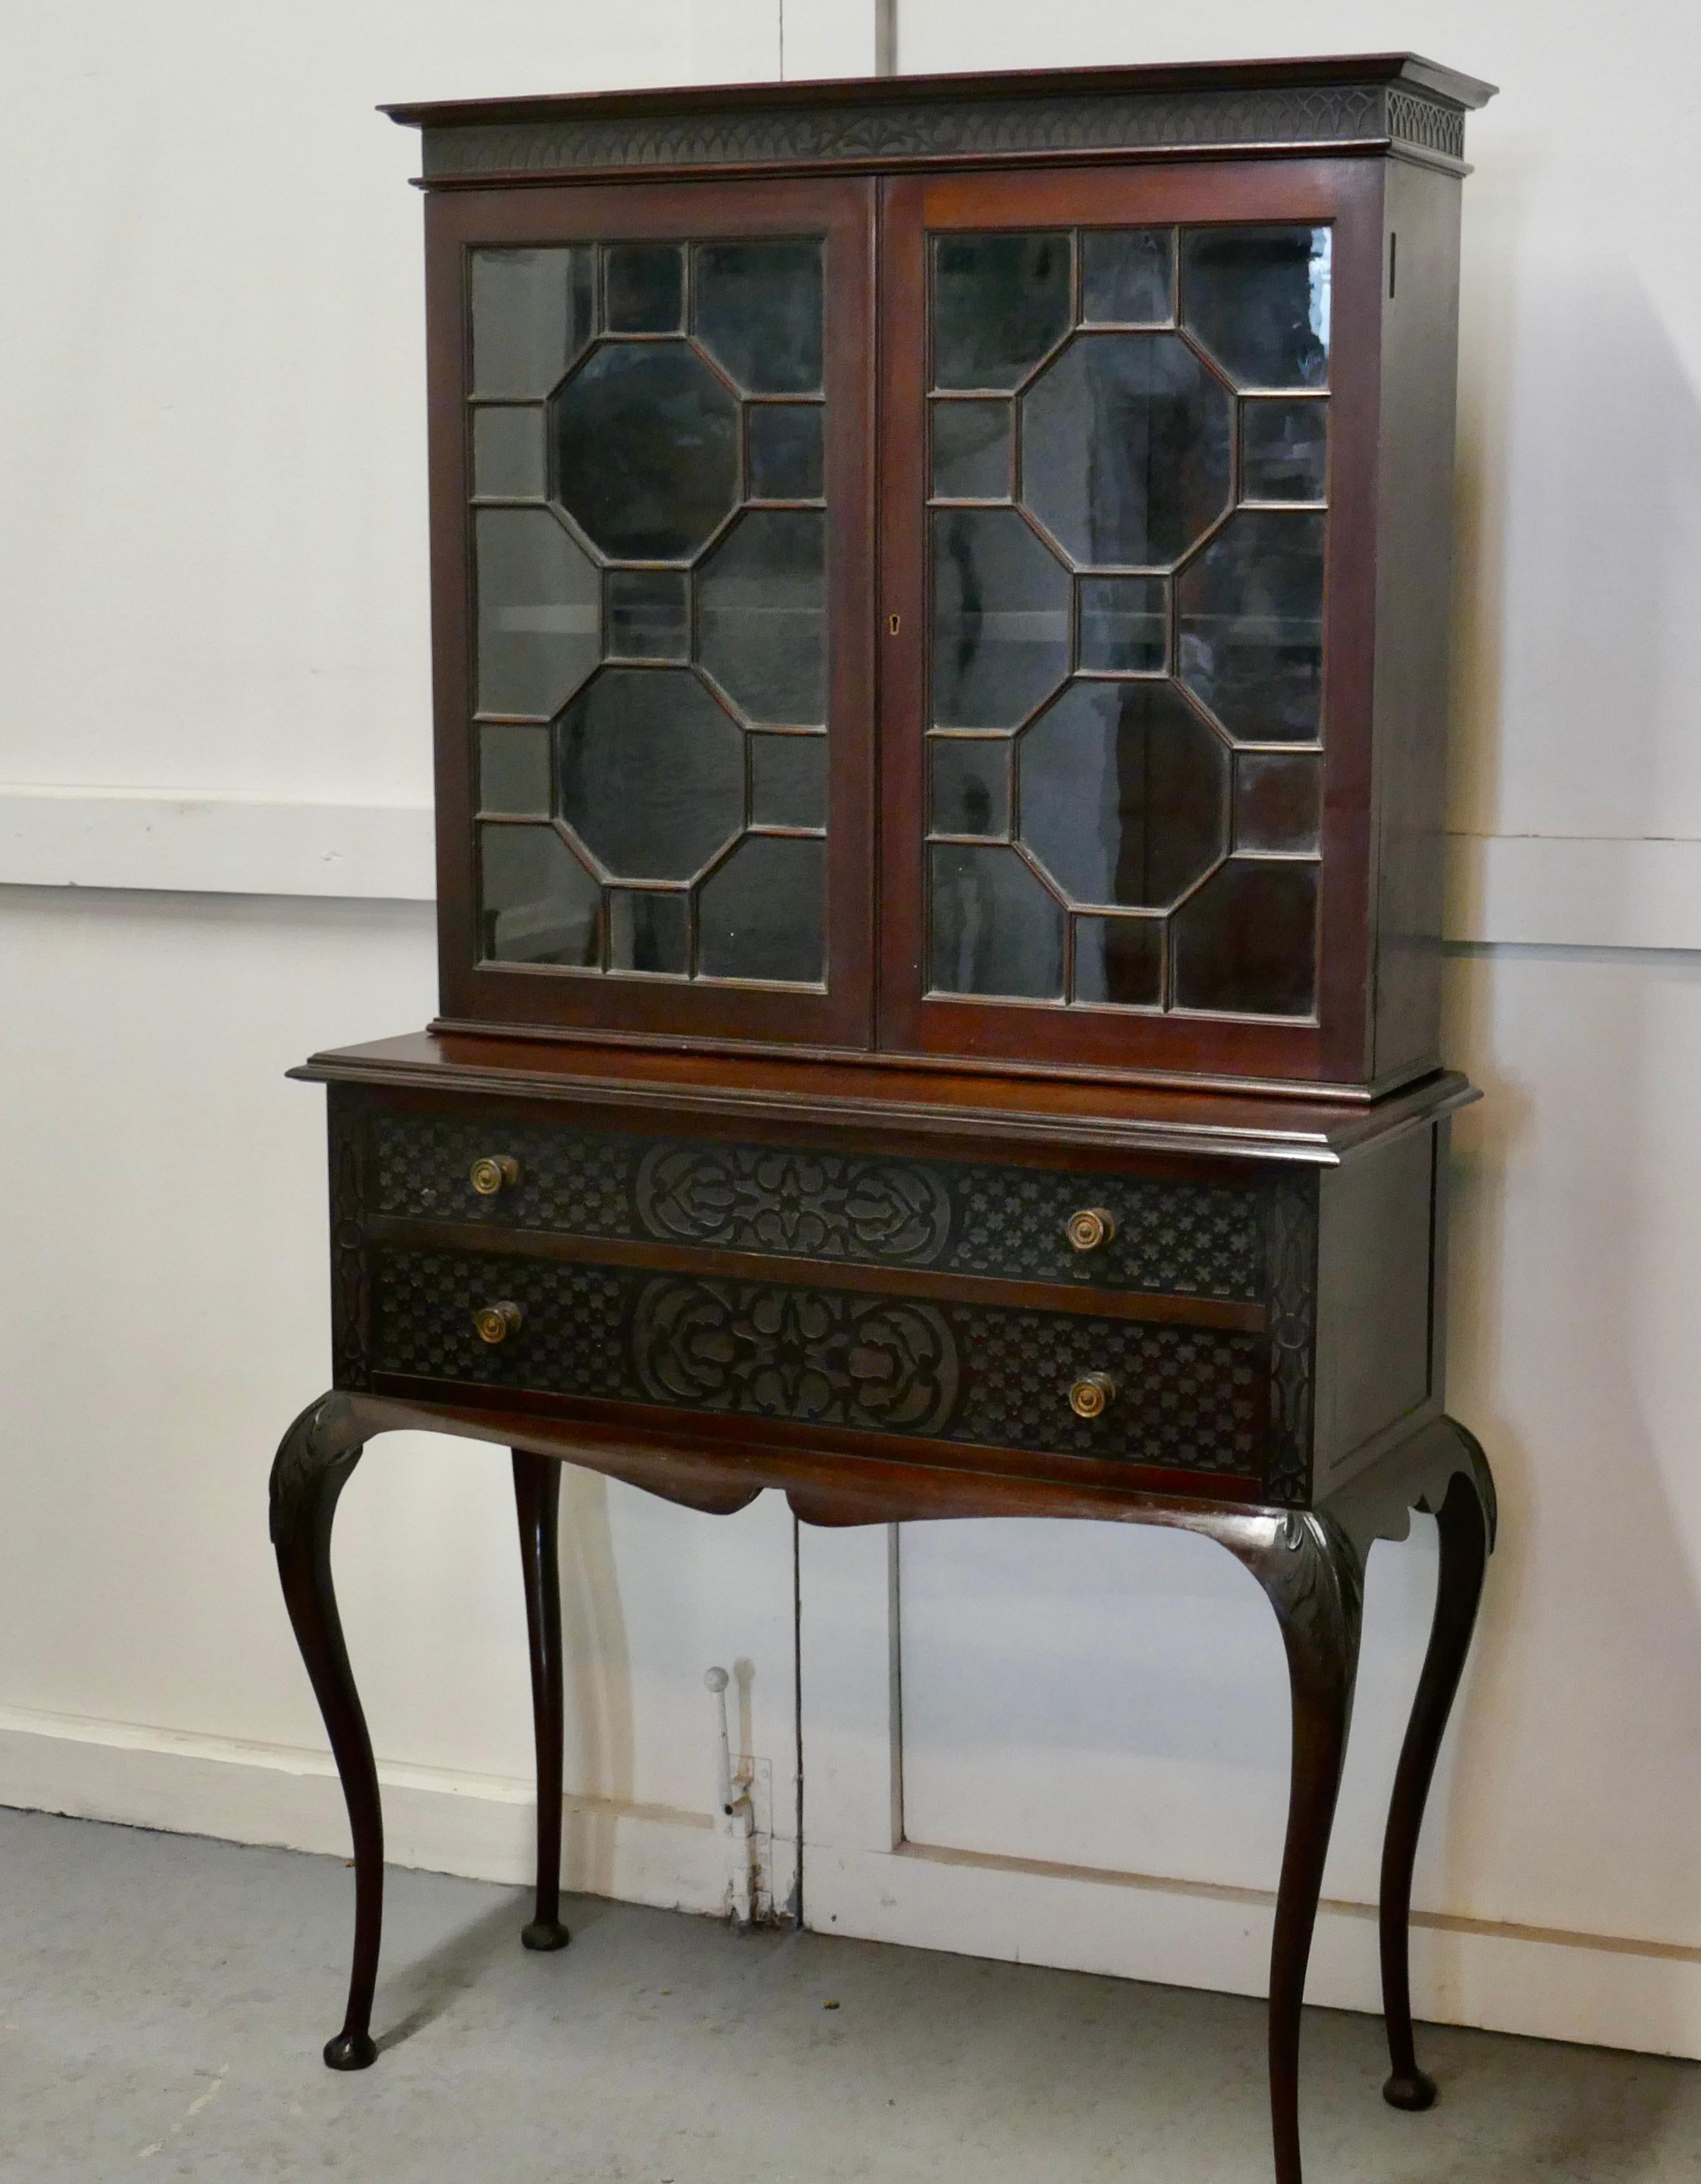 Chinese Chippendale astral glazed display cabinet

This is a very attractive piece, it is made in mahogany, the cabinet has 2 astral glazed doors and is shelved inside
The base of the cabinet has 2 long drawers with brass handles and it stand on